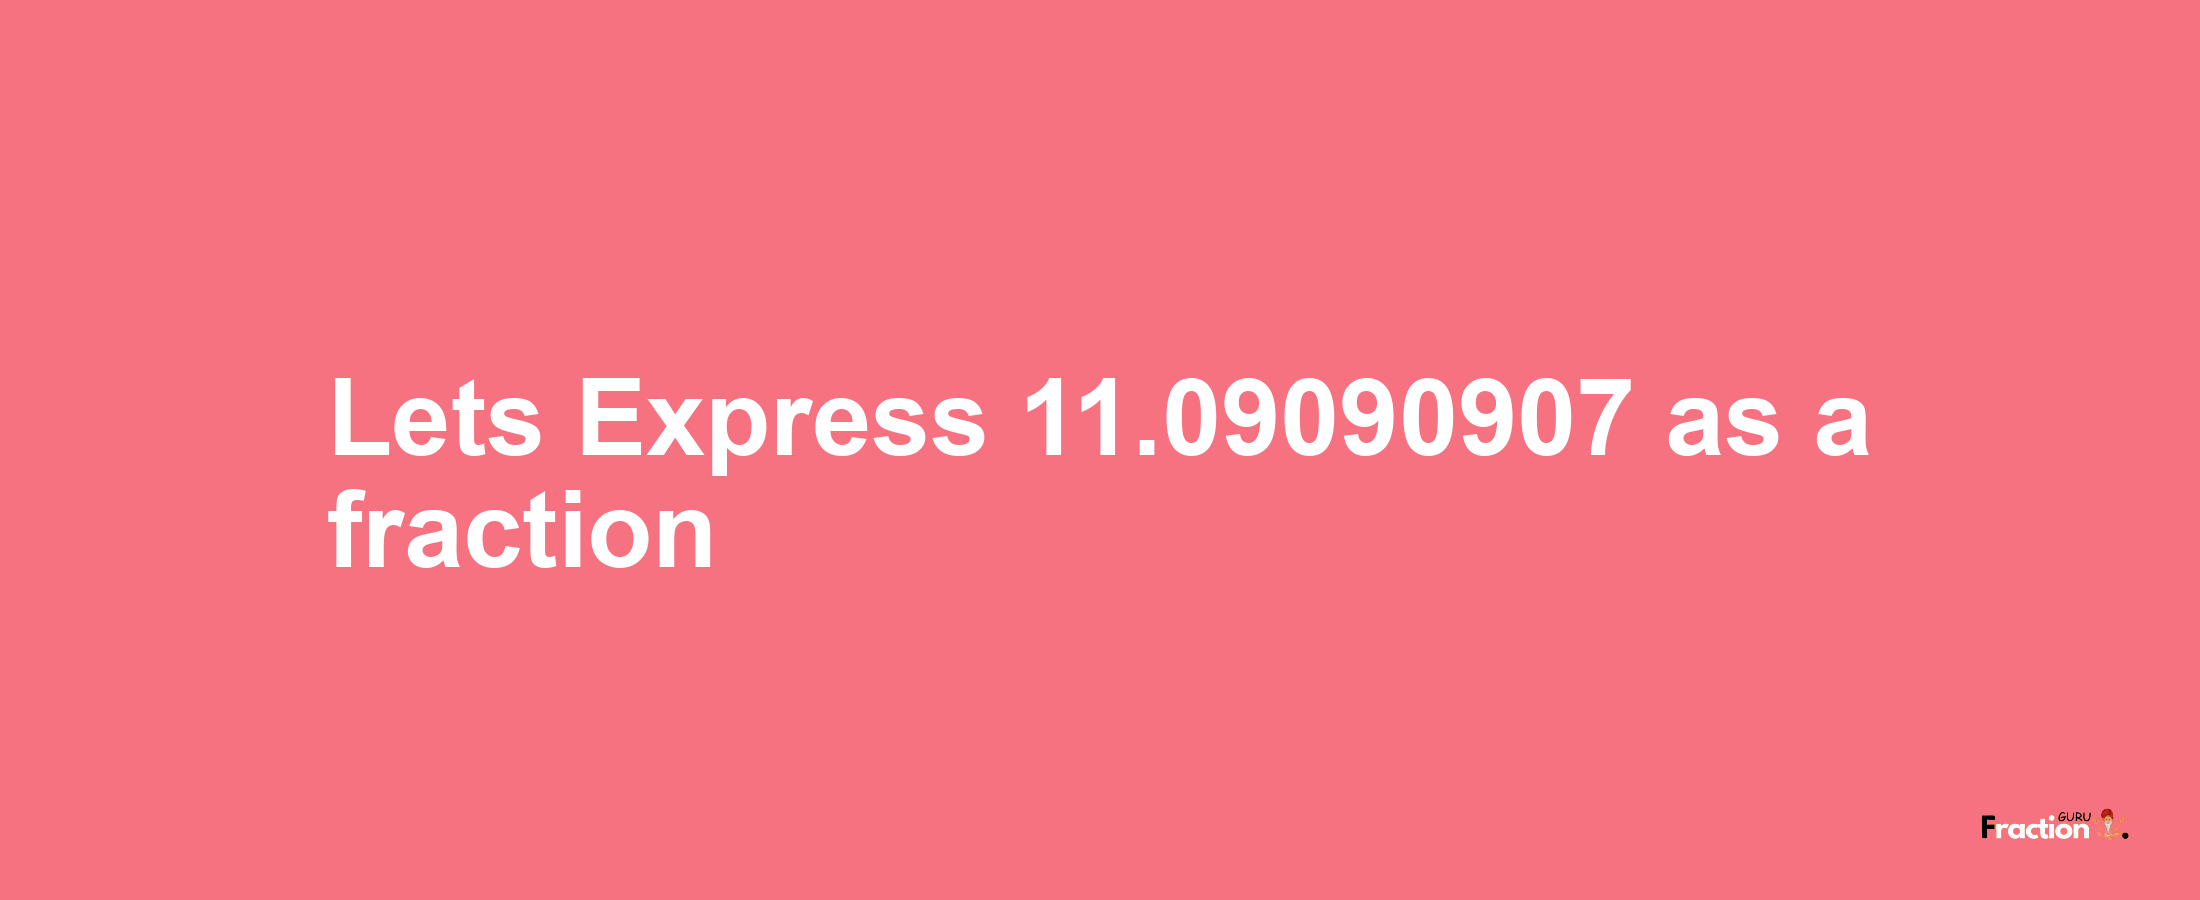 Lets Express 11.09090907 as afraction